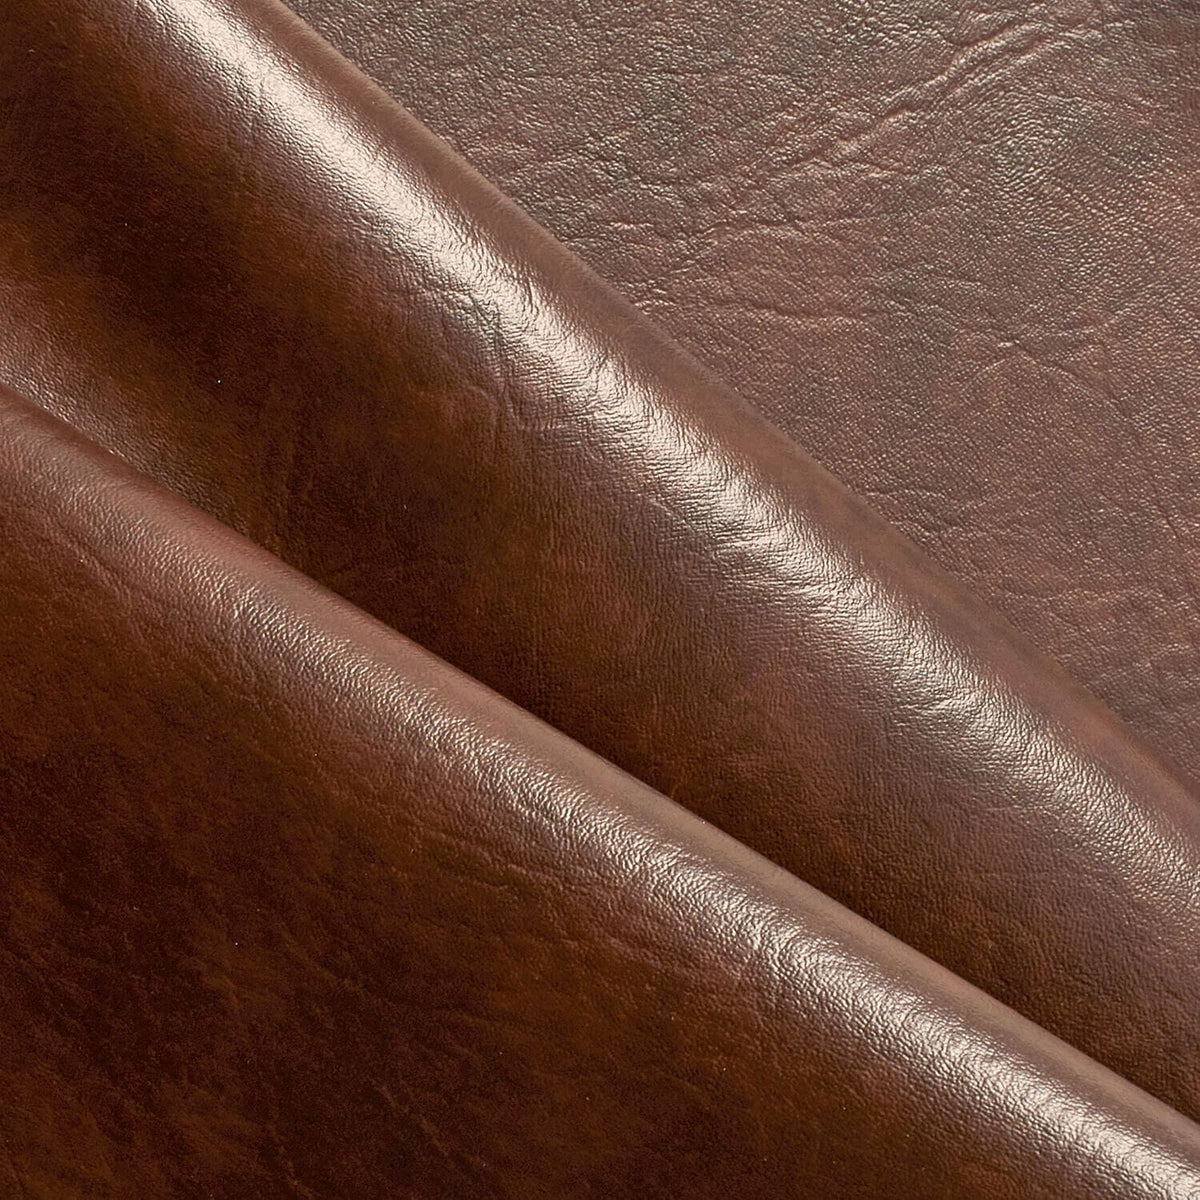 Ottertex Marine Vinyl 54 PVC Polyester Faux Leather Fabric By The Yard -  Marble